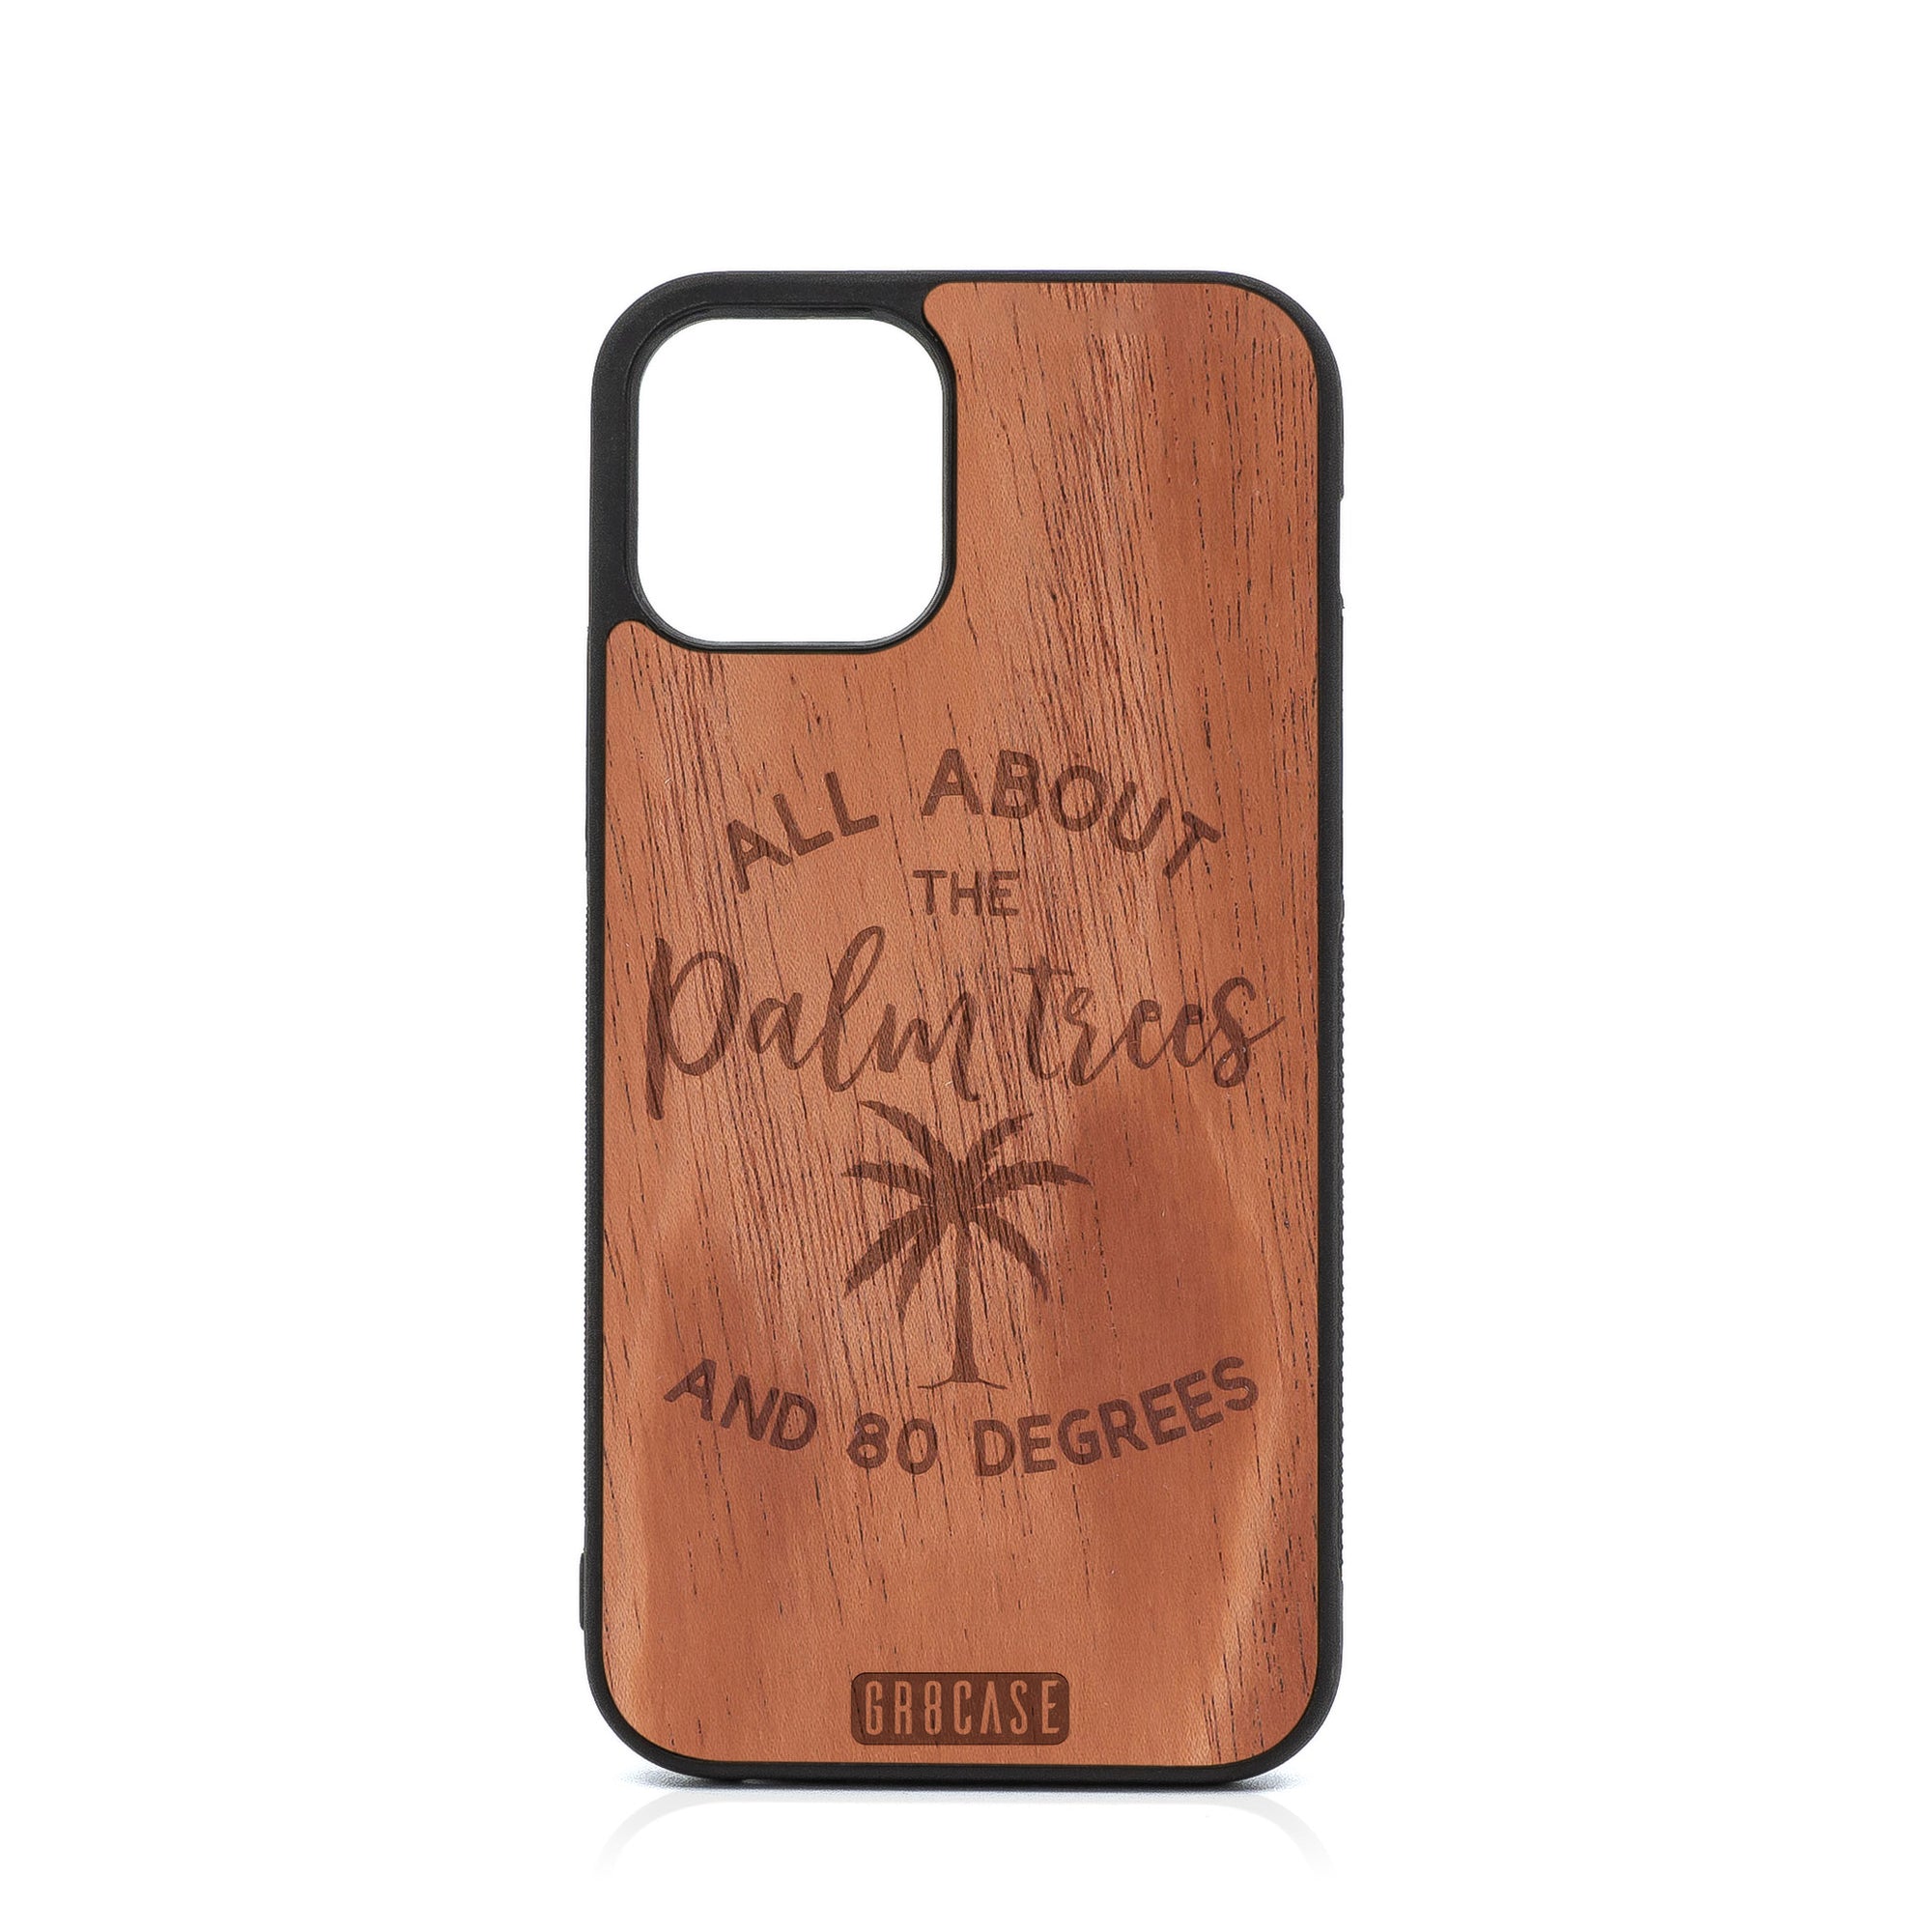 All About The Palm Trees And 80 Degrees Design Wood Case For iPhone 12 Pro